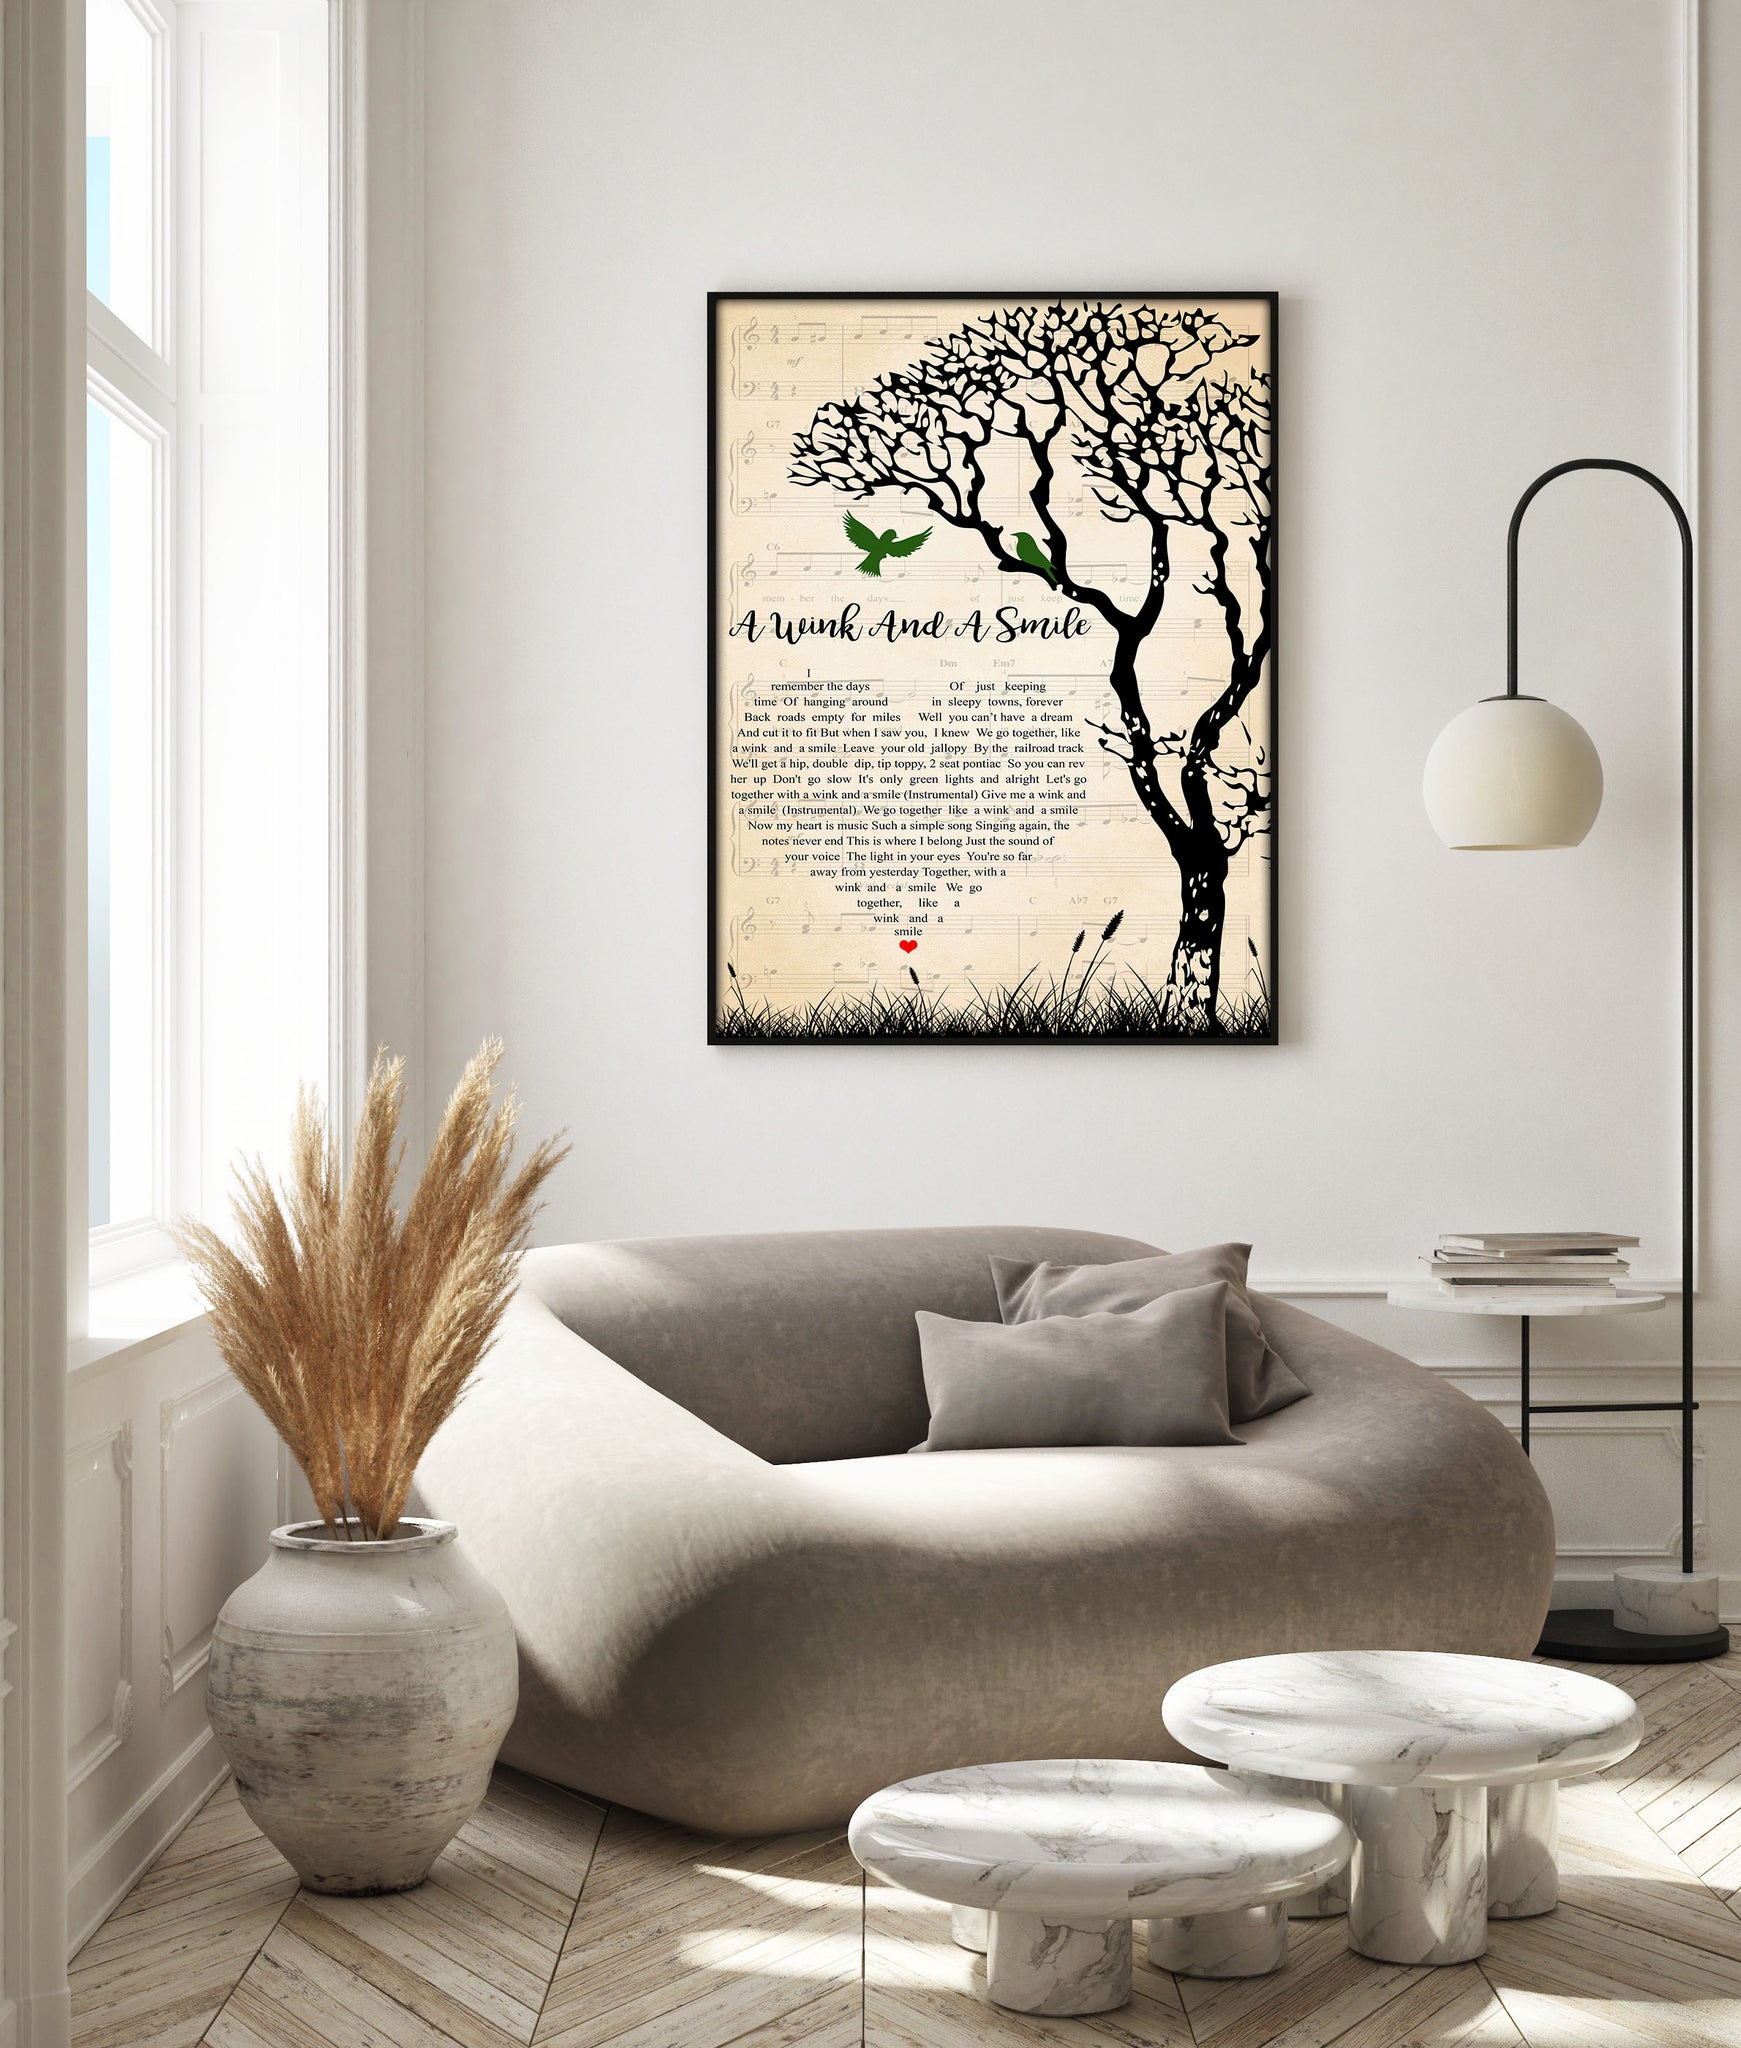 Skitongifts Poster No Frame, A Wink And A Smile Song Lyrics Heart Tree Birds, Wall Art, Home Decor